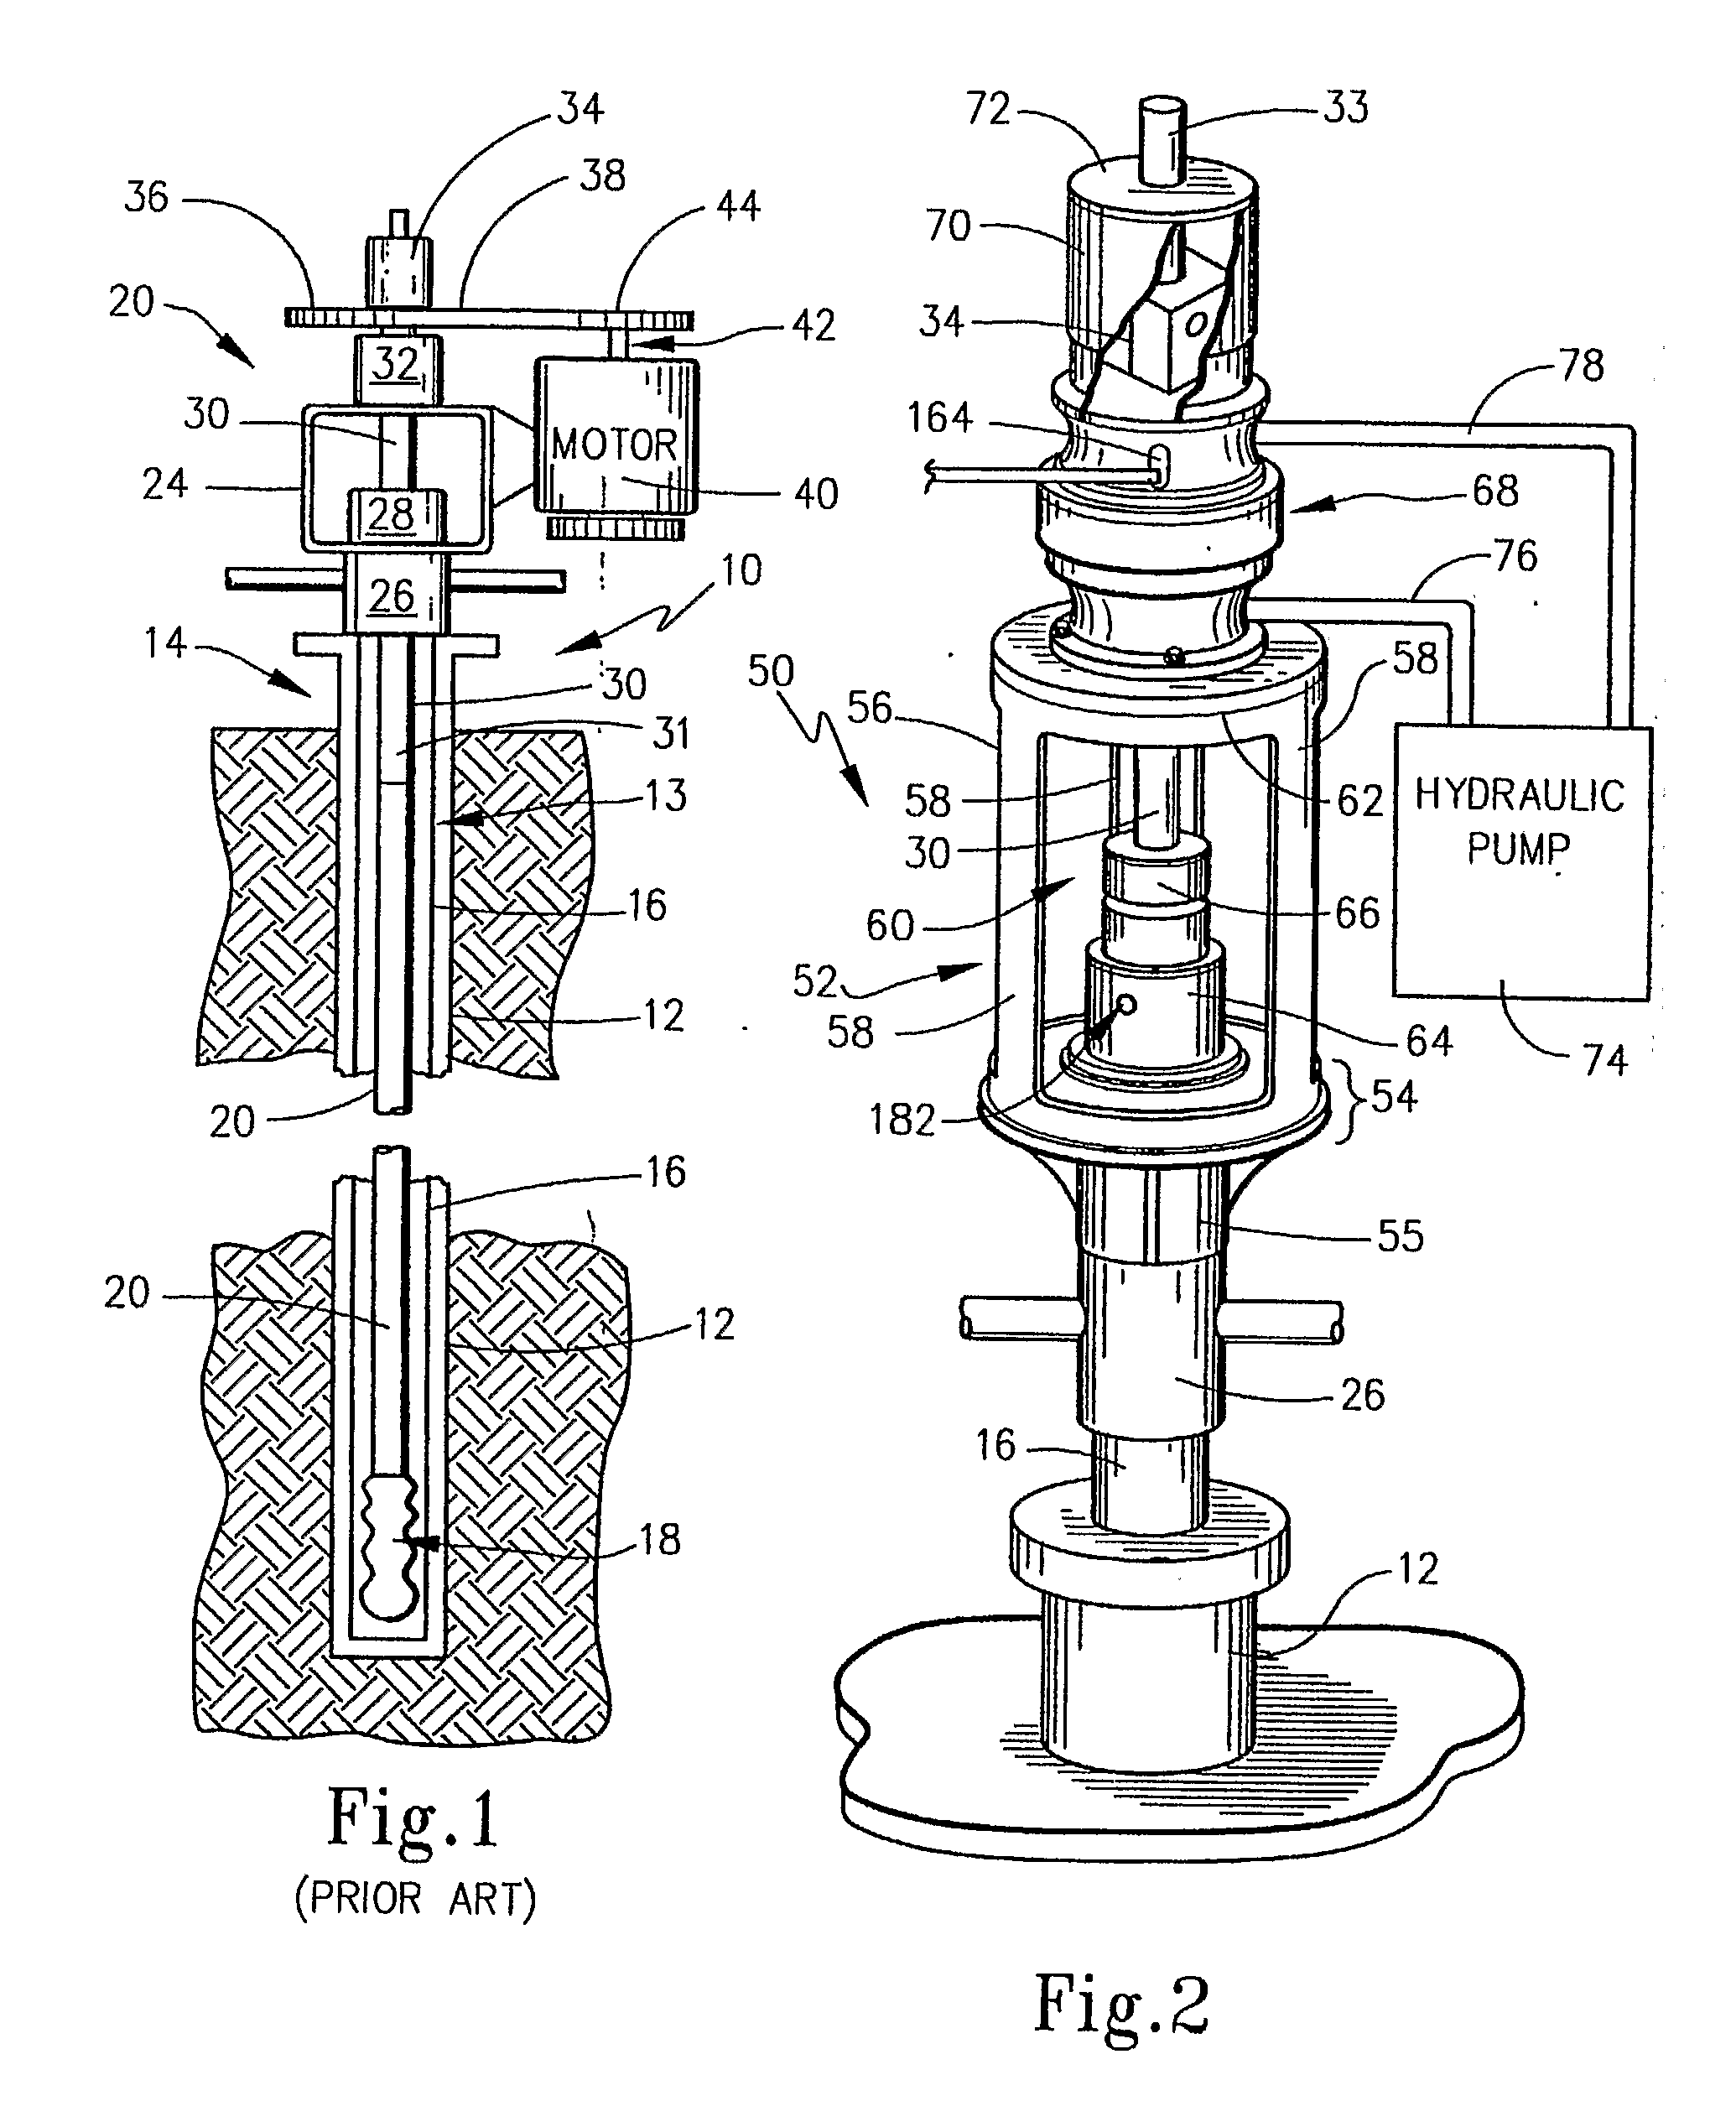 Linear Drive Assembly with Rotary Union for Well Head Applications and Method Implemented Thereby